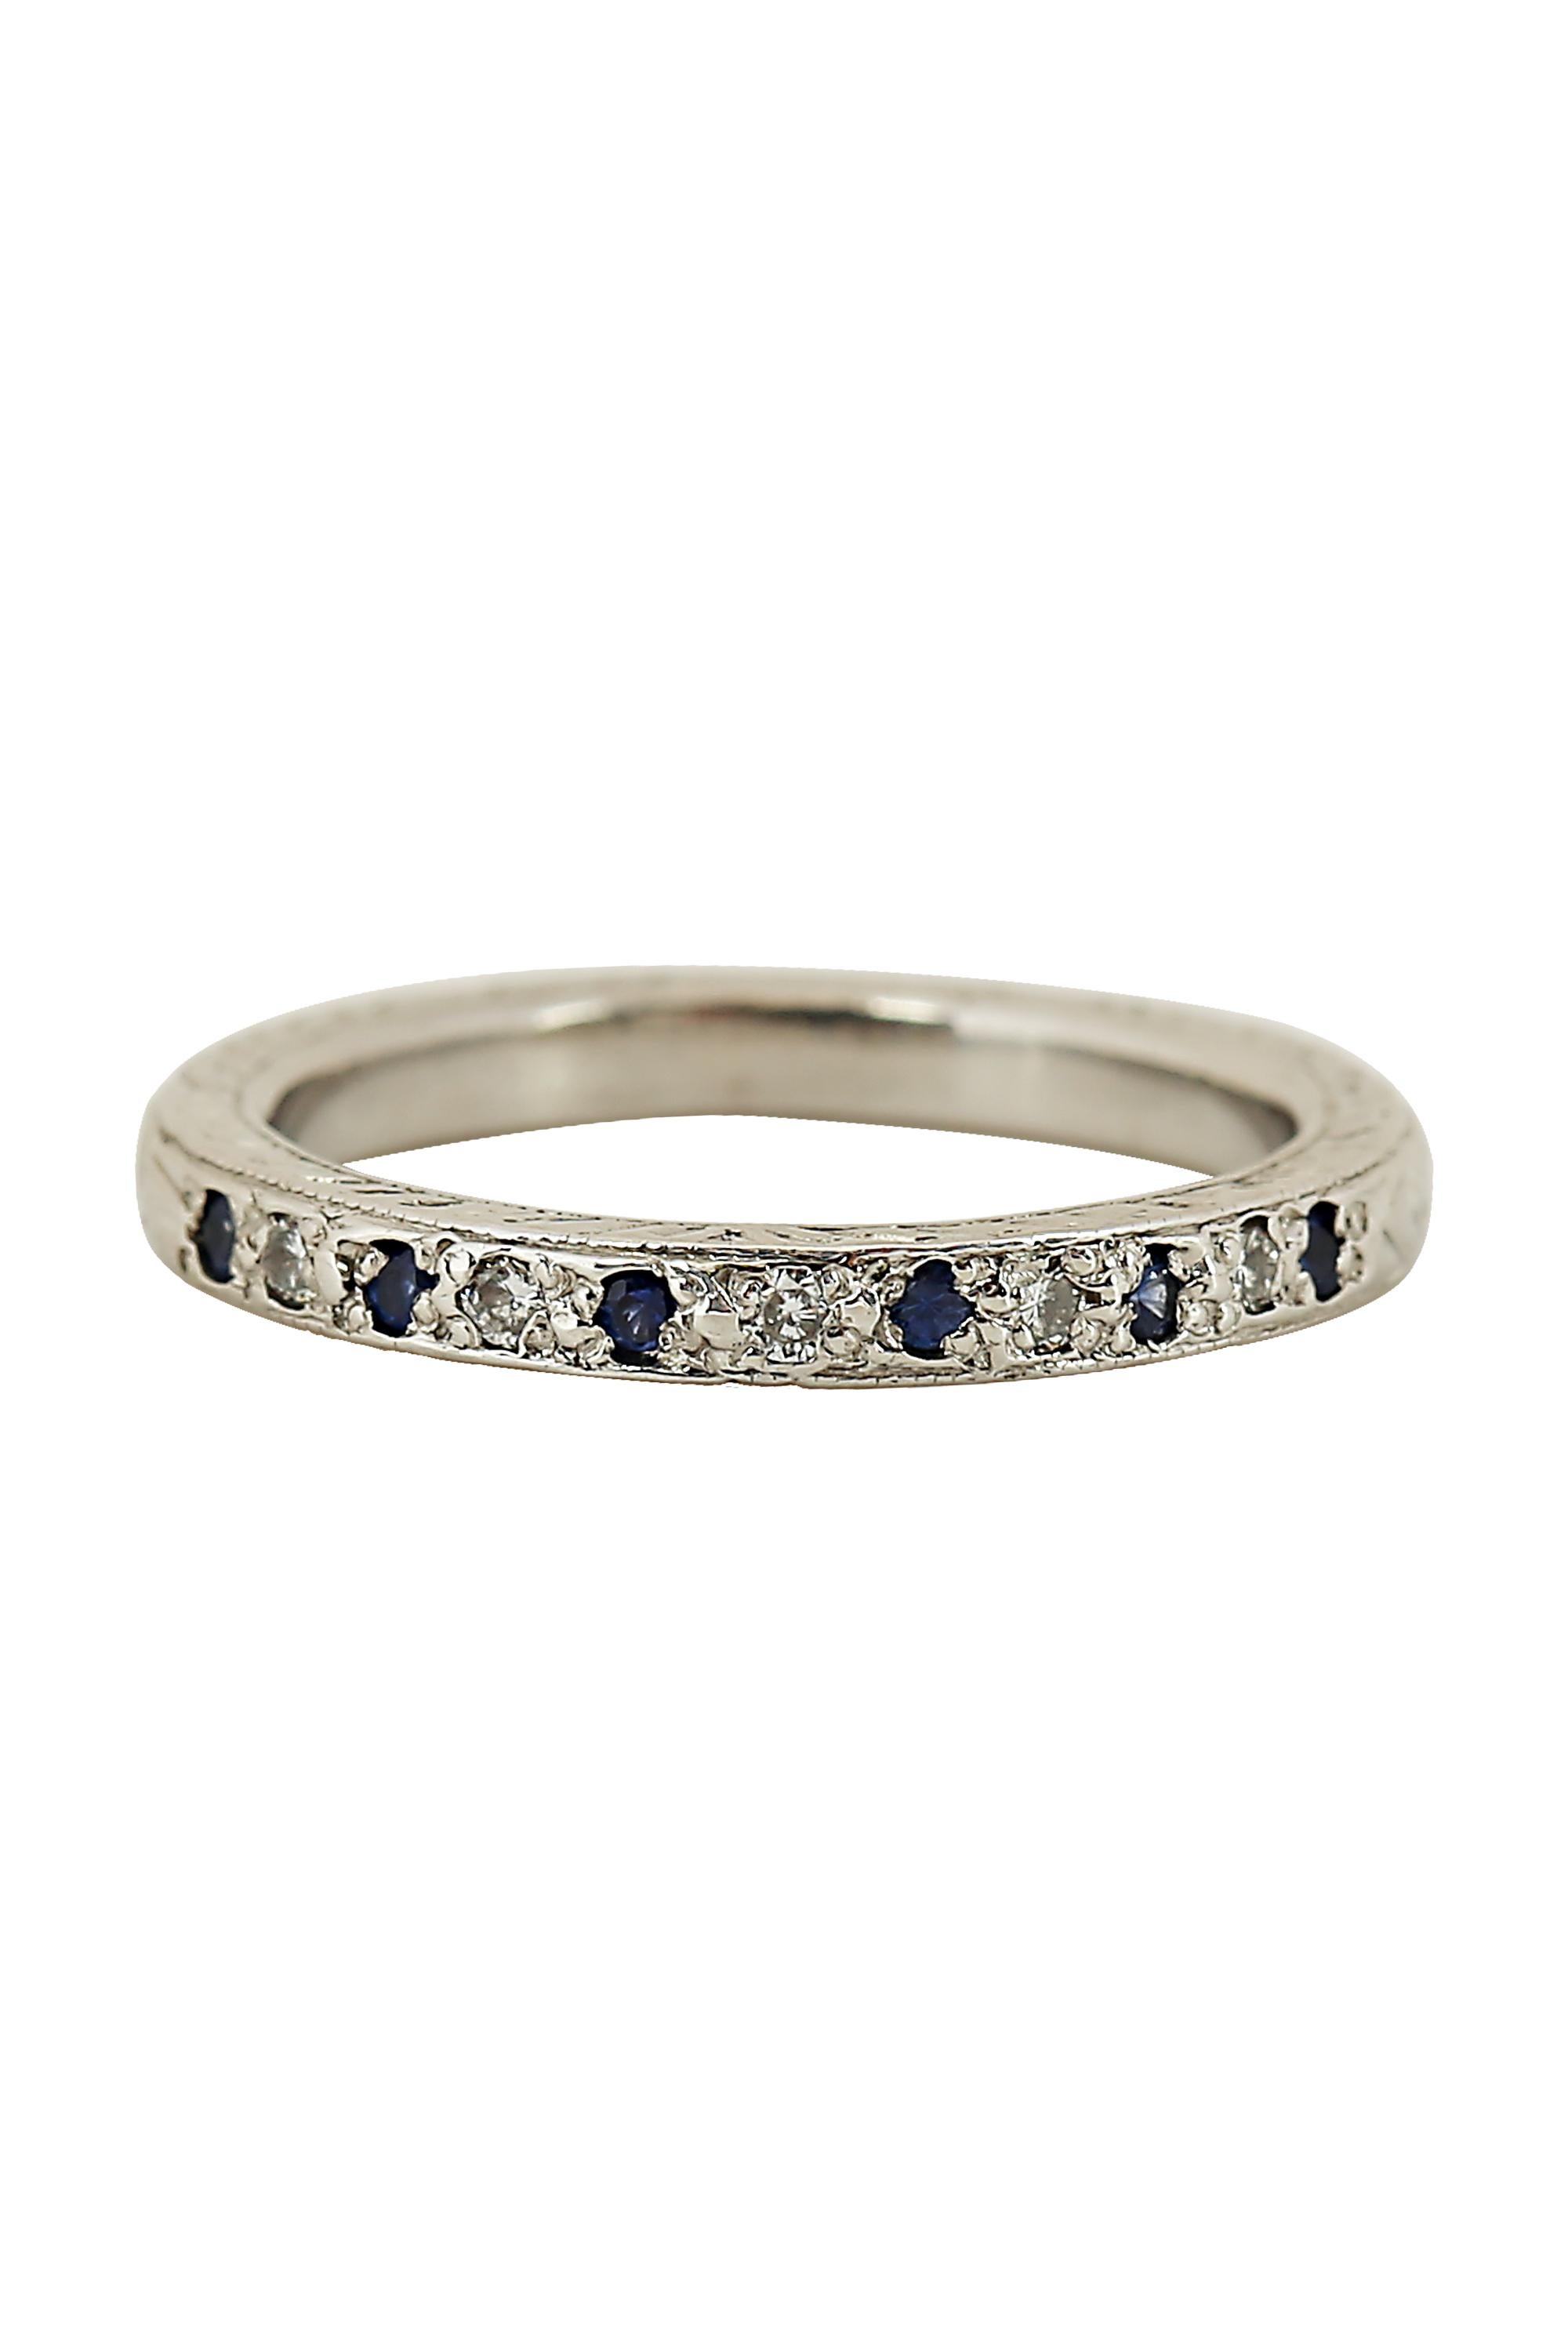 Round Cut Sapphire and Diamond Platinum Band Ring For Sale